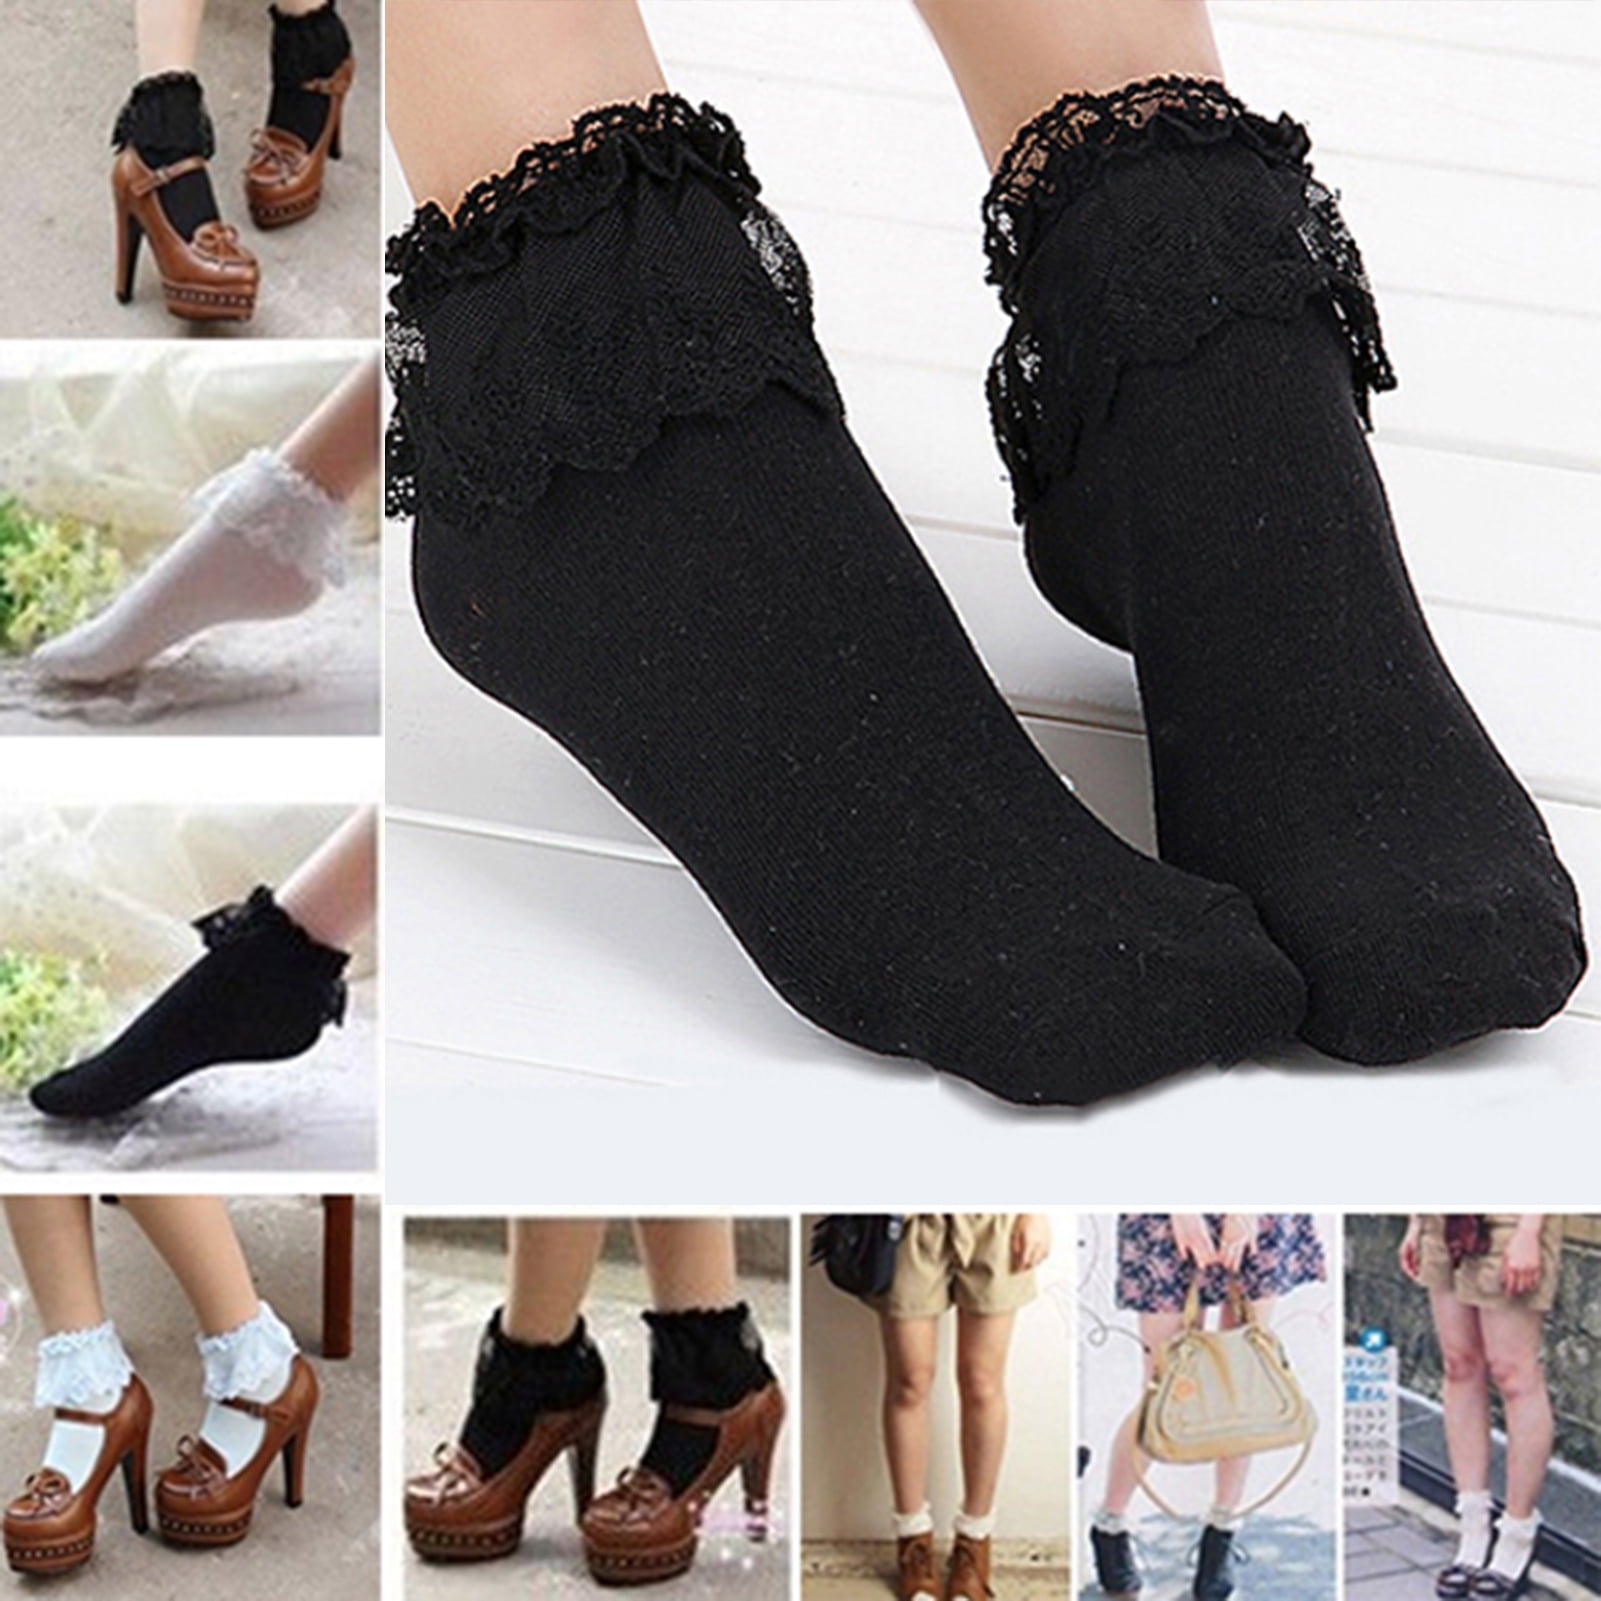 1pair New Women Ladies Retro Lace Ruffle Frilly Ankle Sock Cotton Socks Lovely